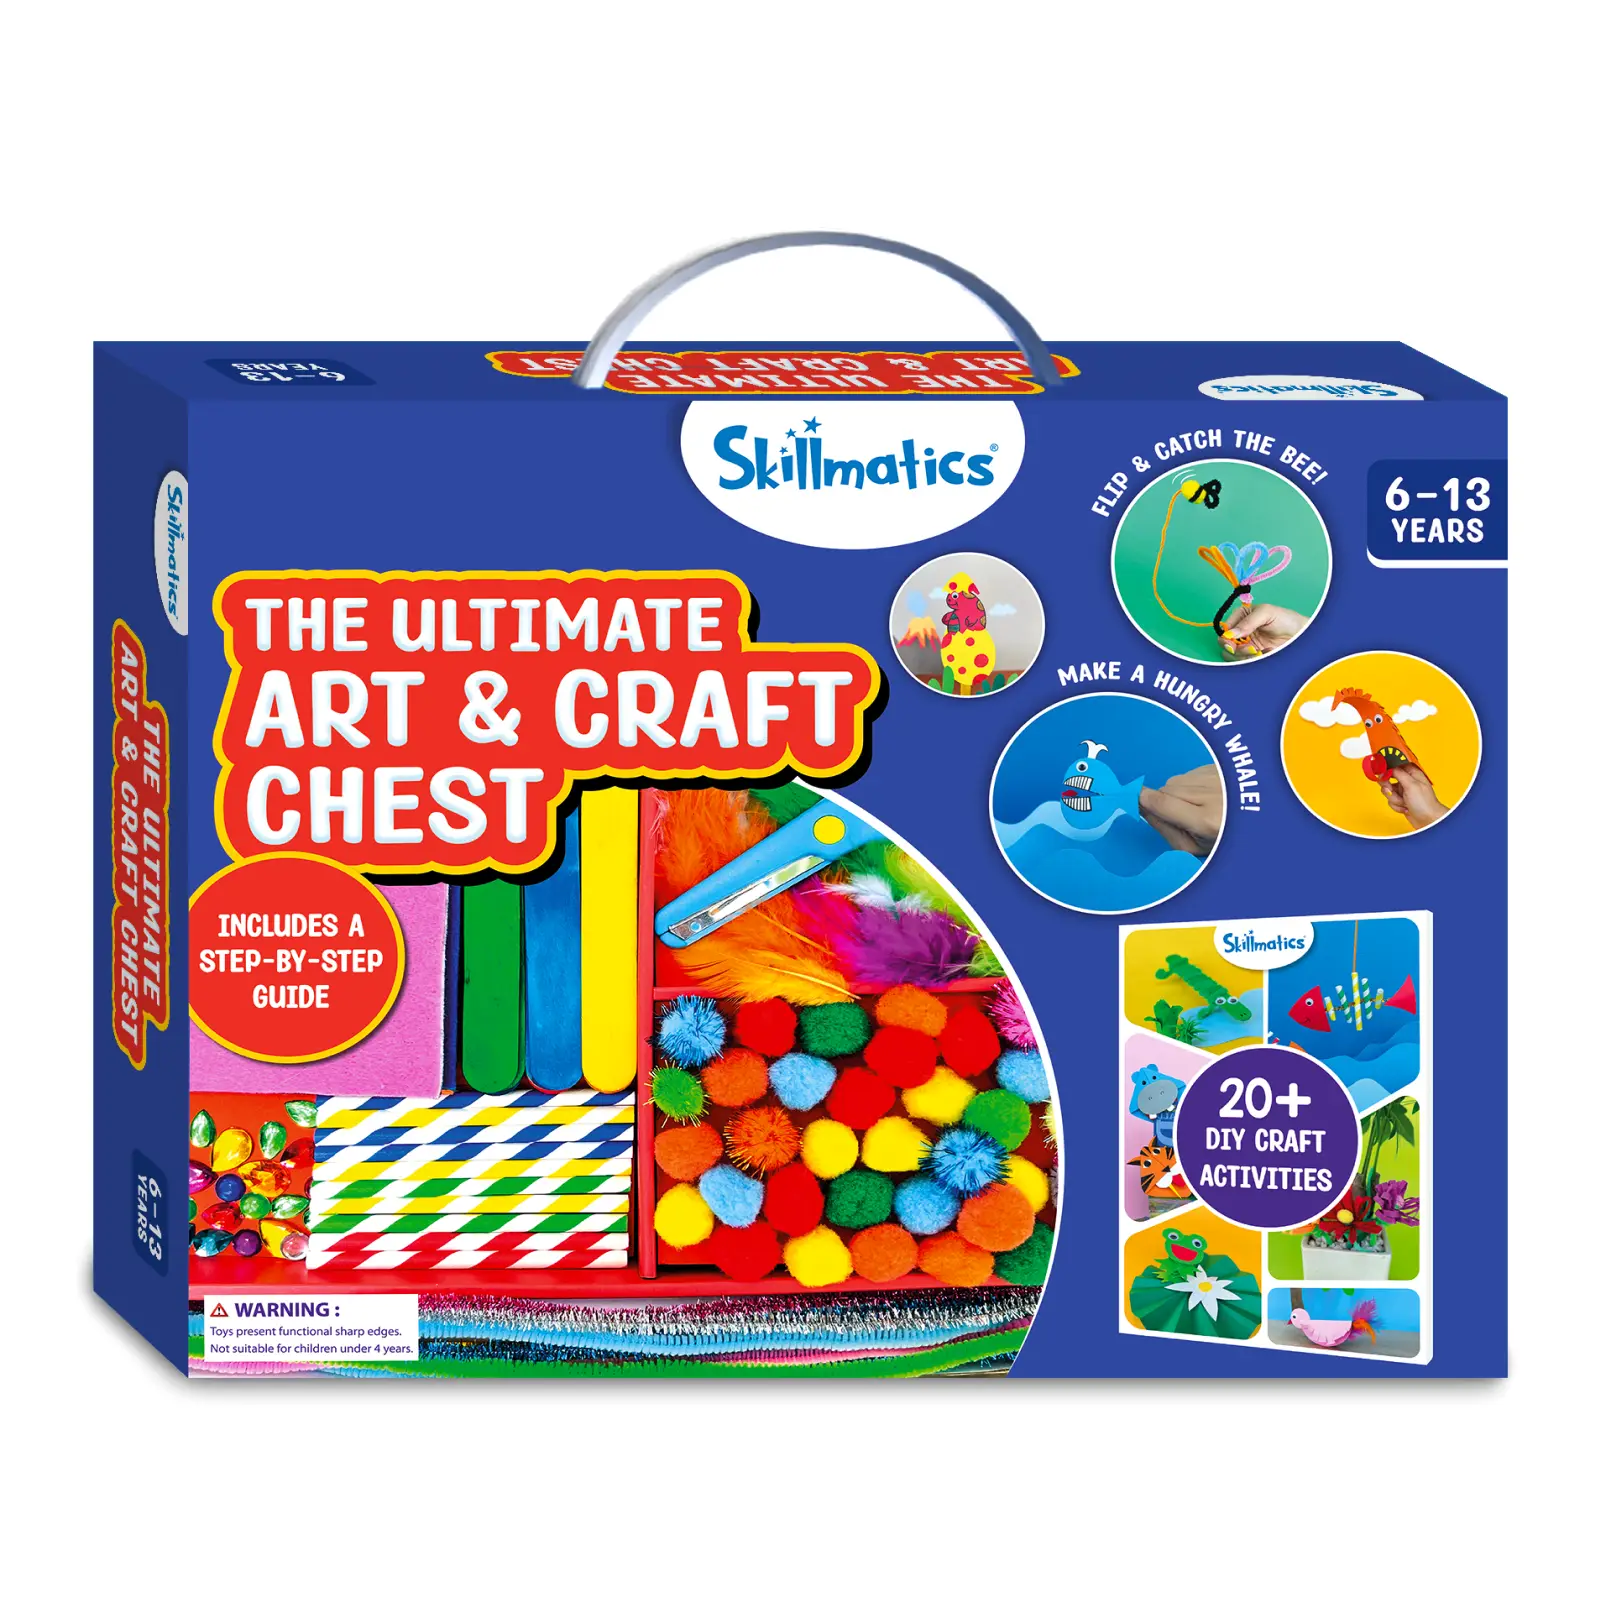 Craft　(for　Ultimate　Art　–　ages　Activity　6-13)　Chest　Skillmatics